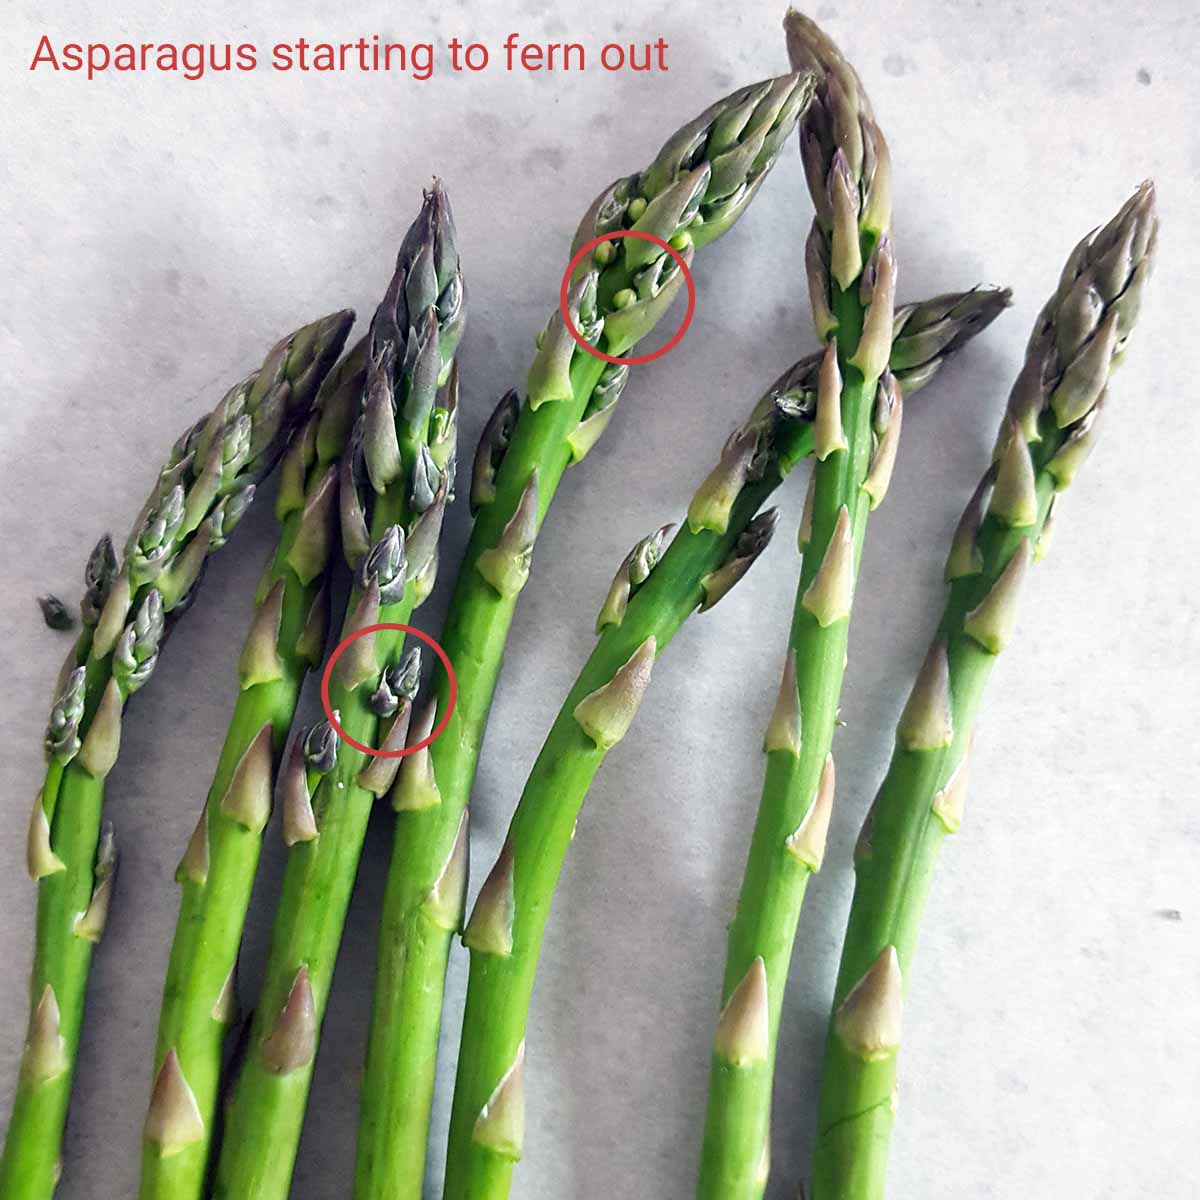 Asparagus that has started to fern out